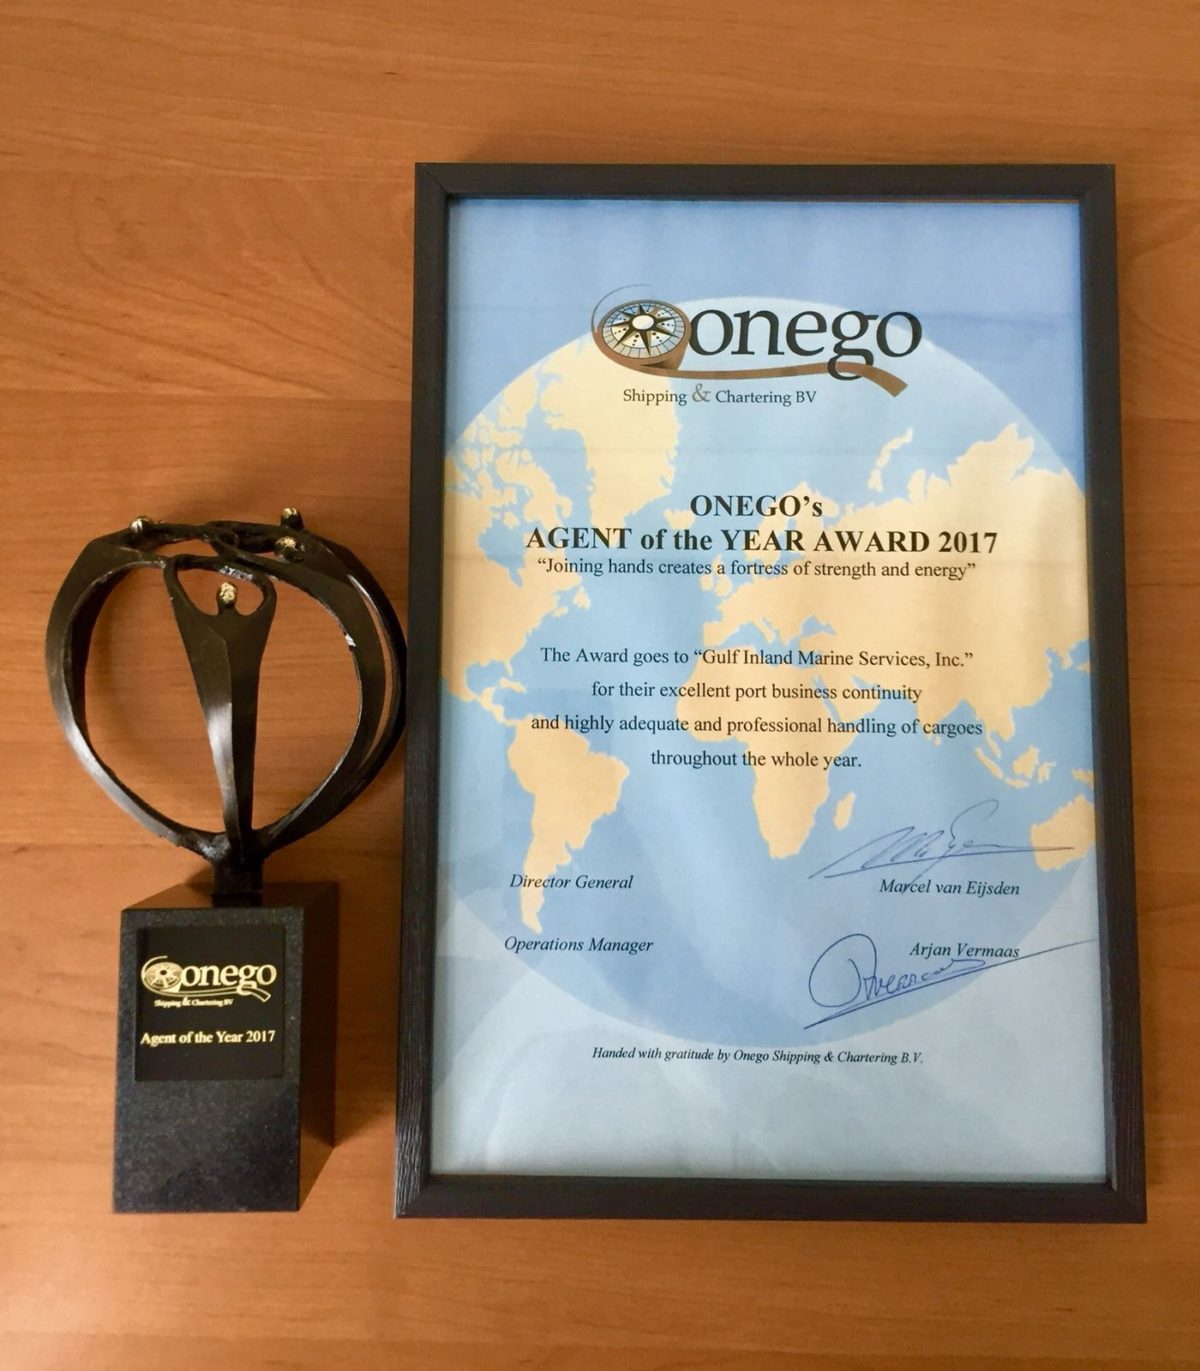 Onego’s Agent of the Year 2017 Award